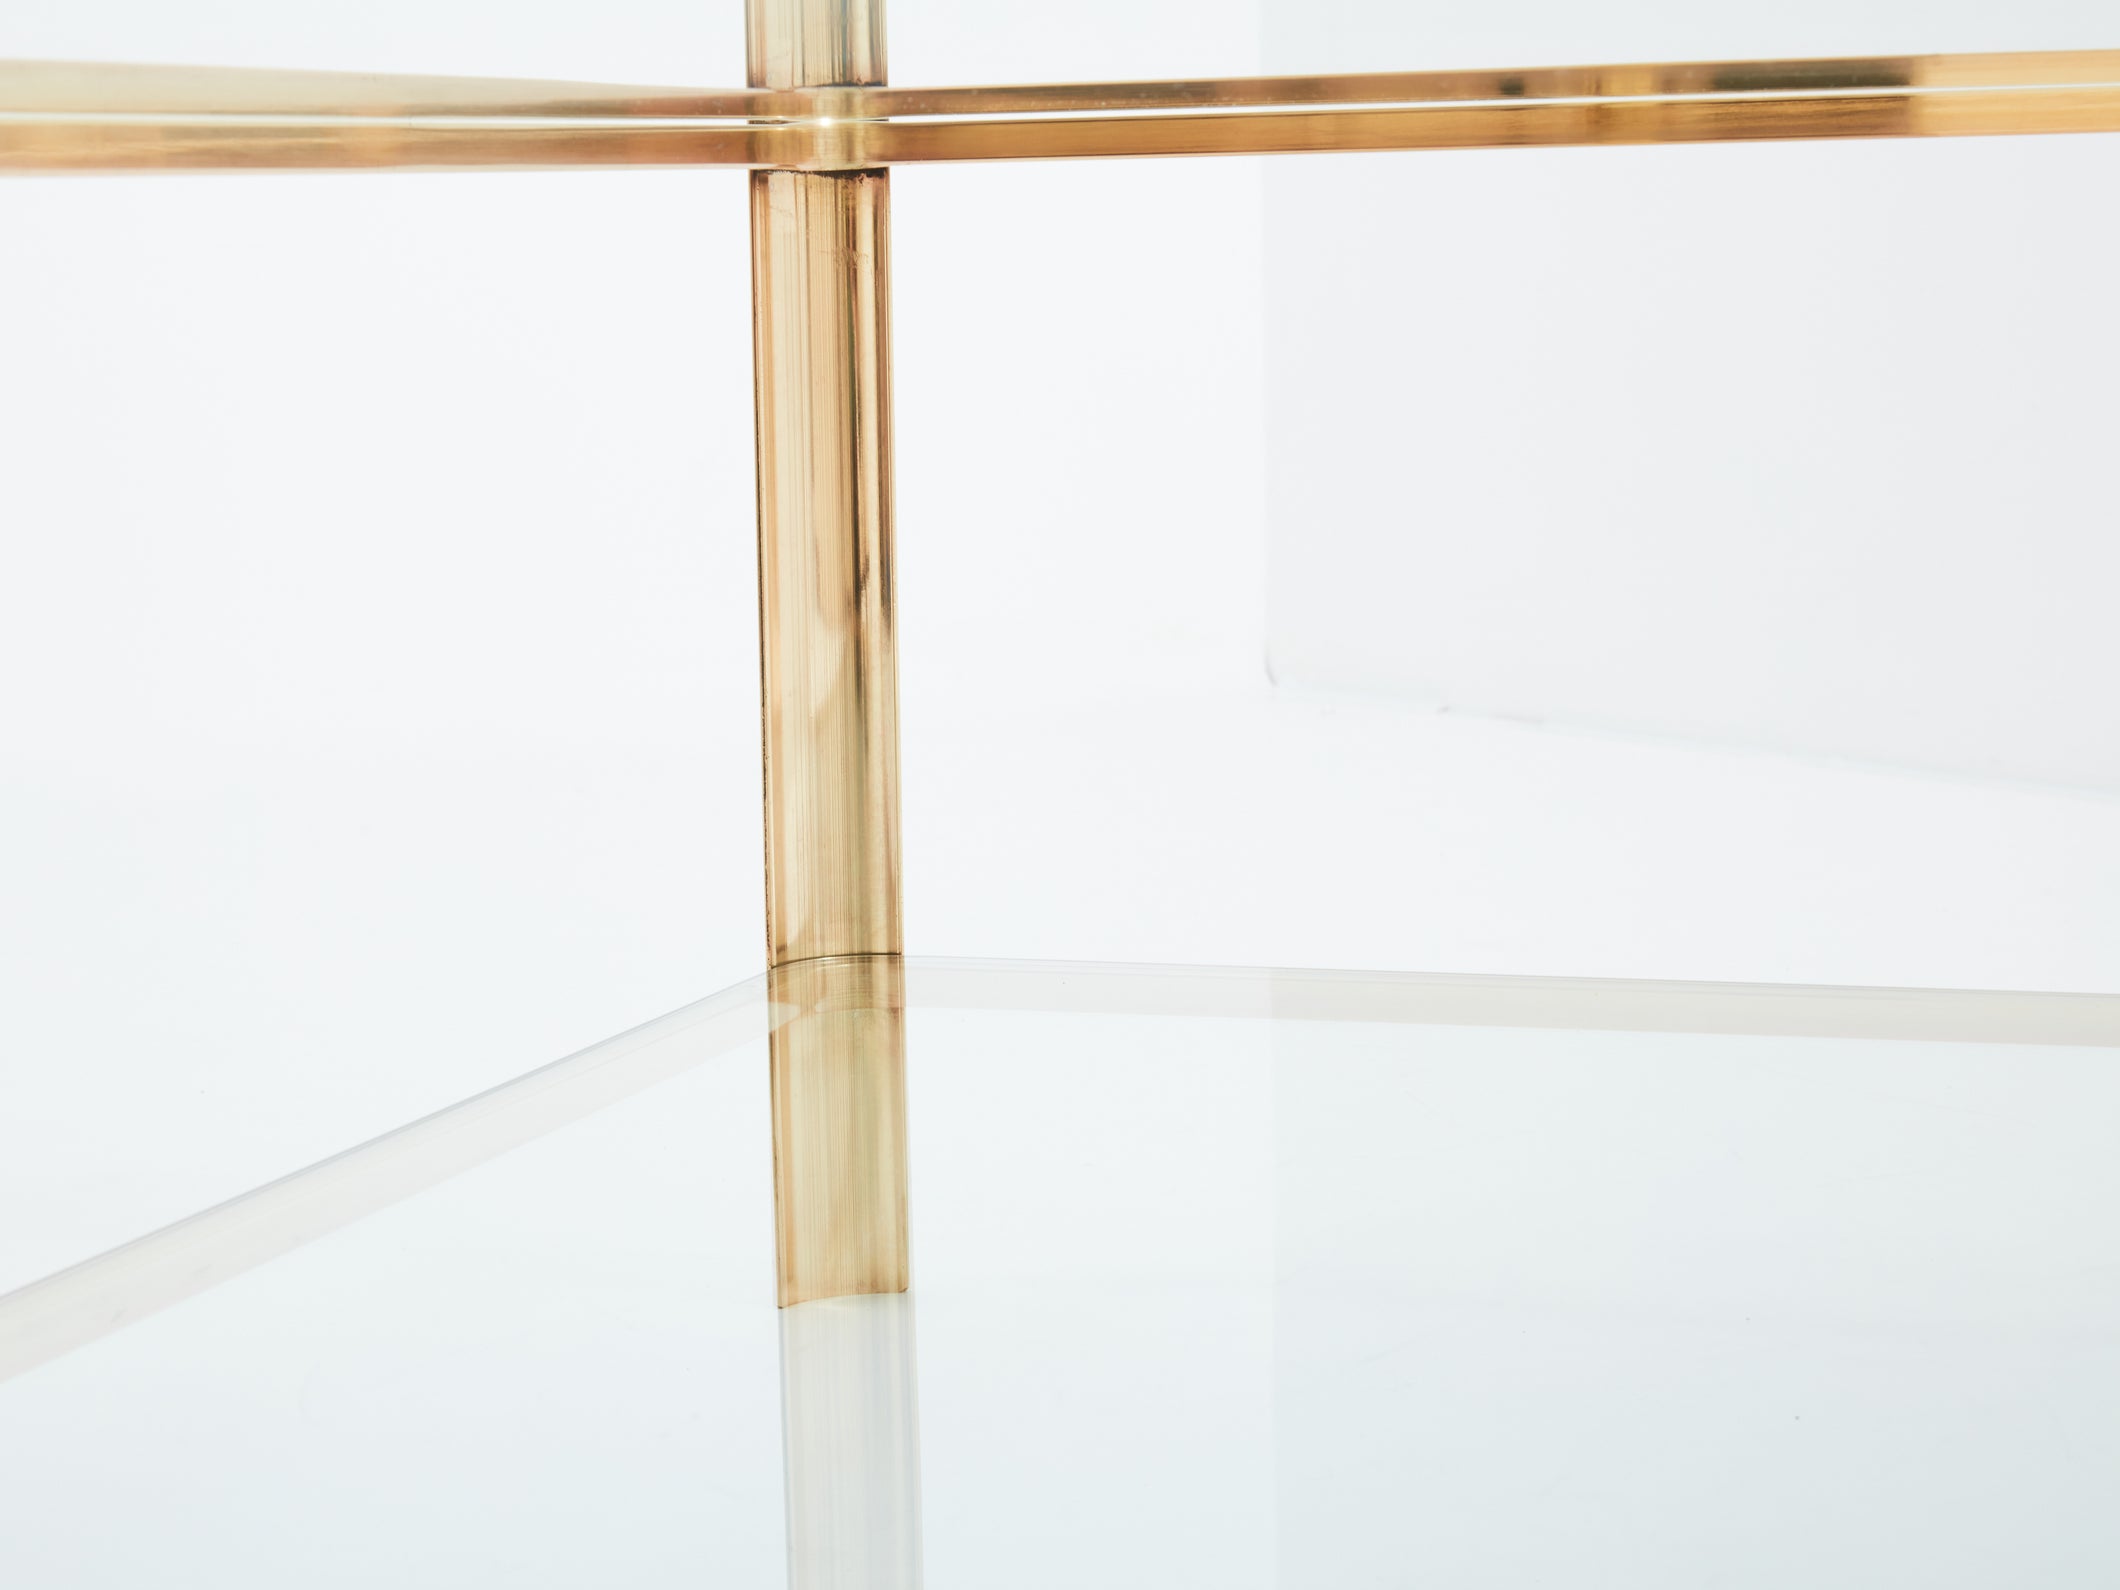 Two-tier Bronze coffee table by J.T. Lepelletier for Broncz 1960s